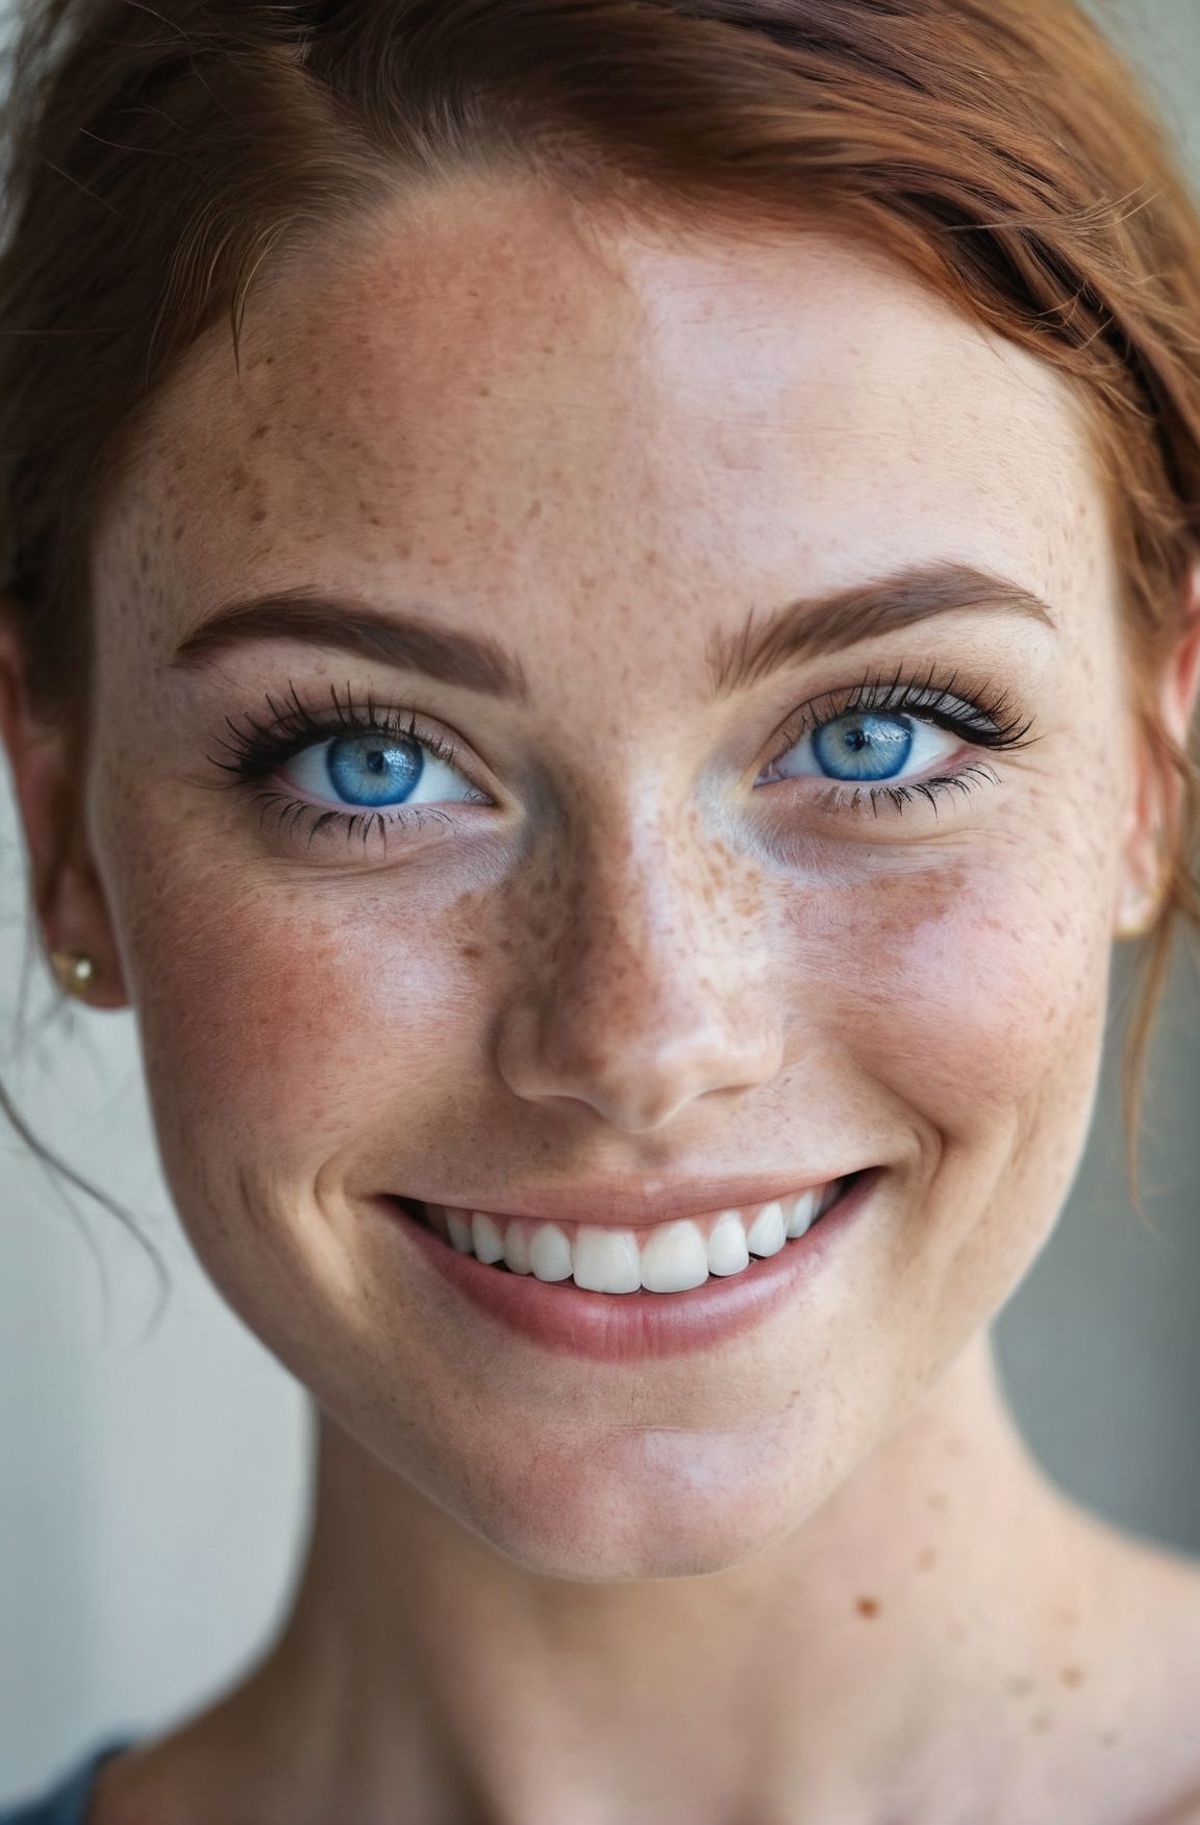 A woman with freckles and blue eyes smiling.